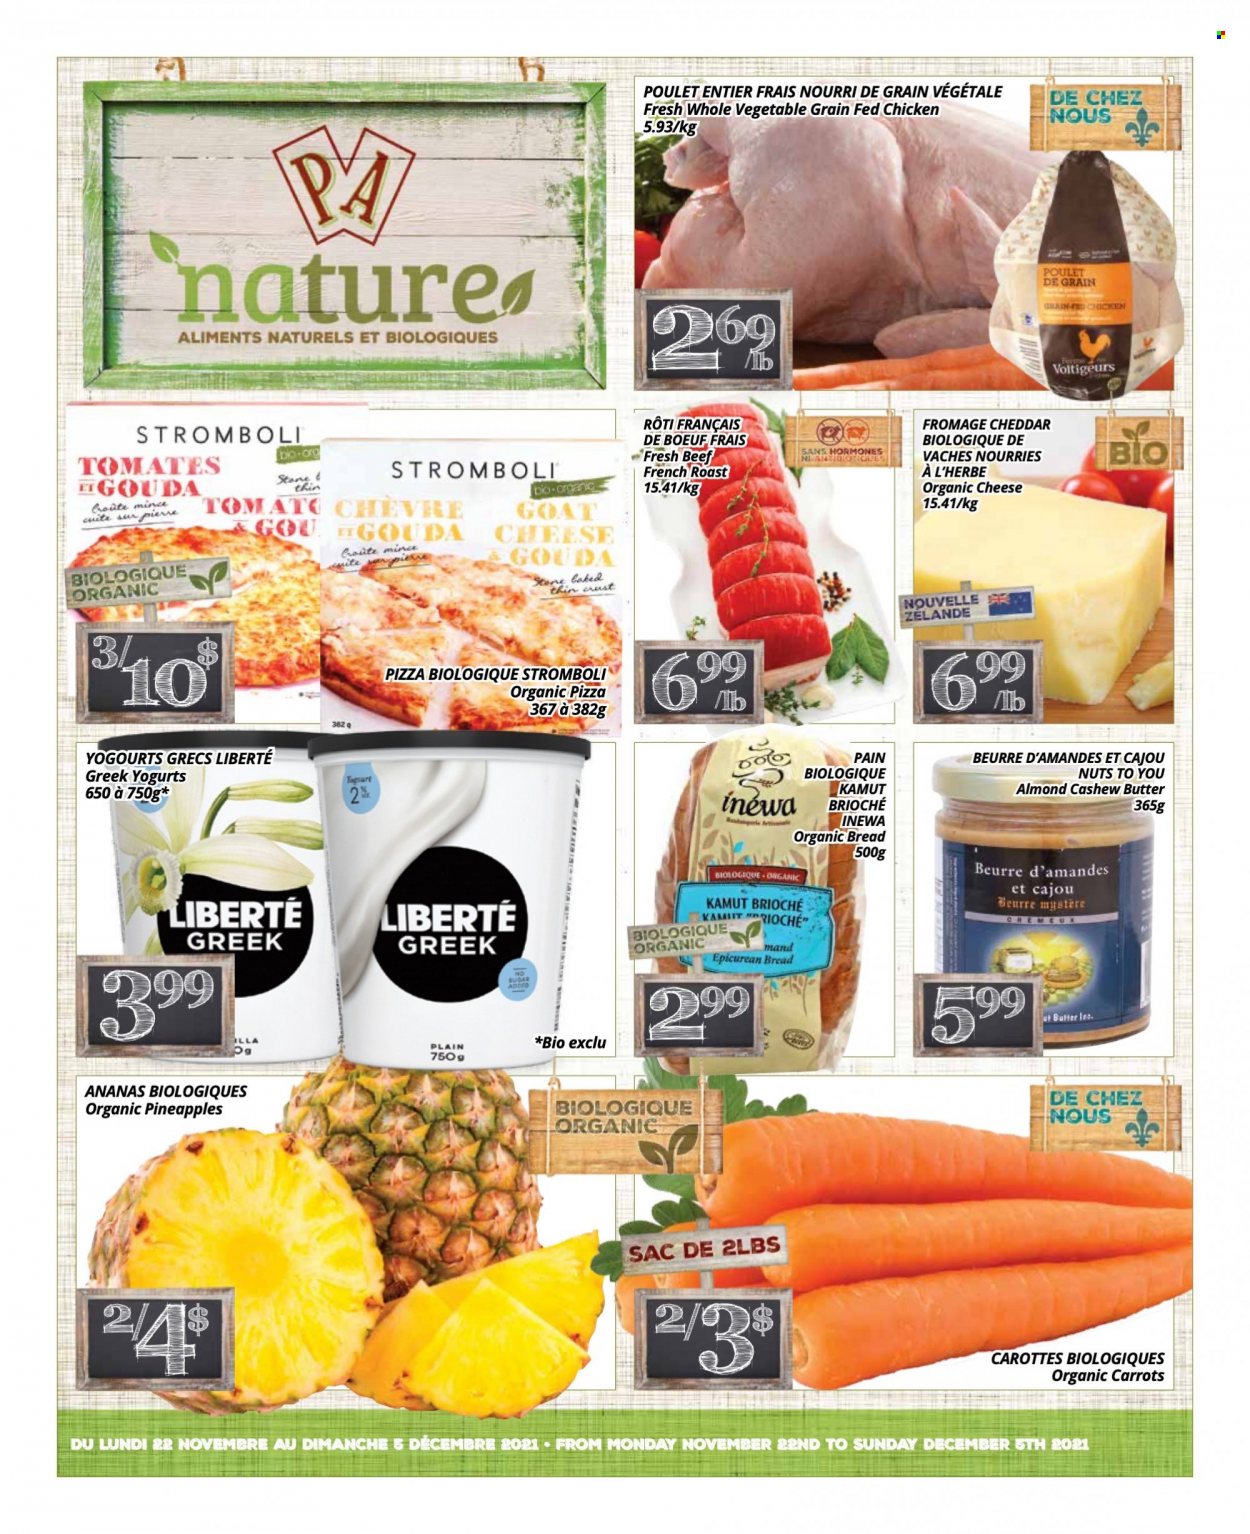 thumbnail - PA Nature Flyer - November 22, 2021 - December 05, 2021 - Sales products - bread, brioche, carrots, pineapple, pizza, gouda, cheddar, butter, cashew cream. Page 1.